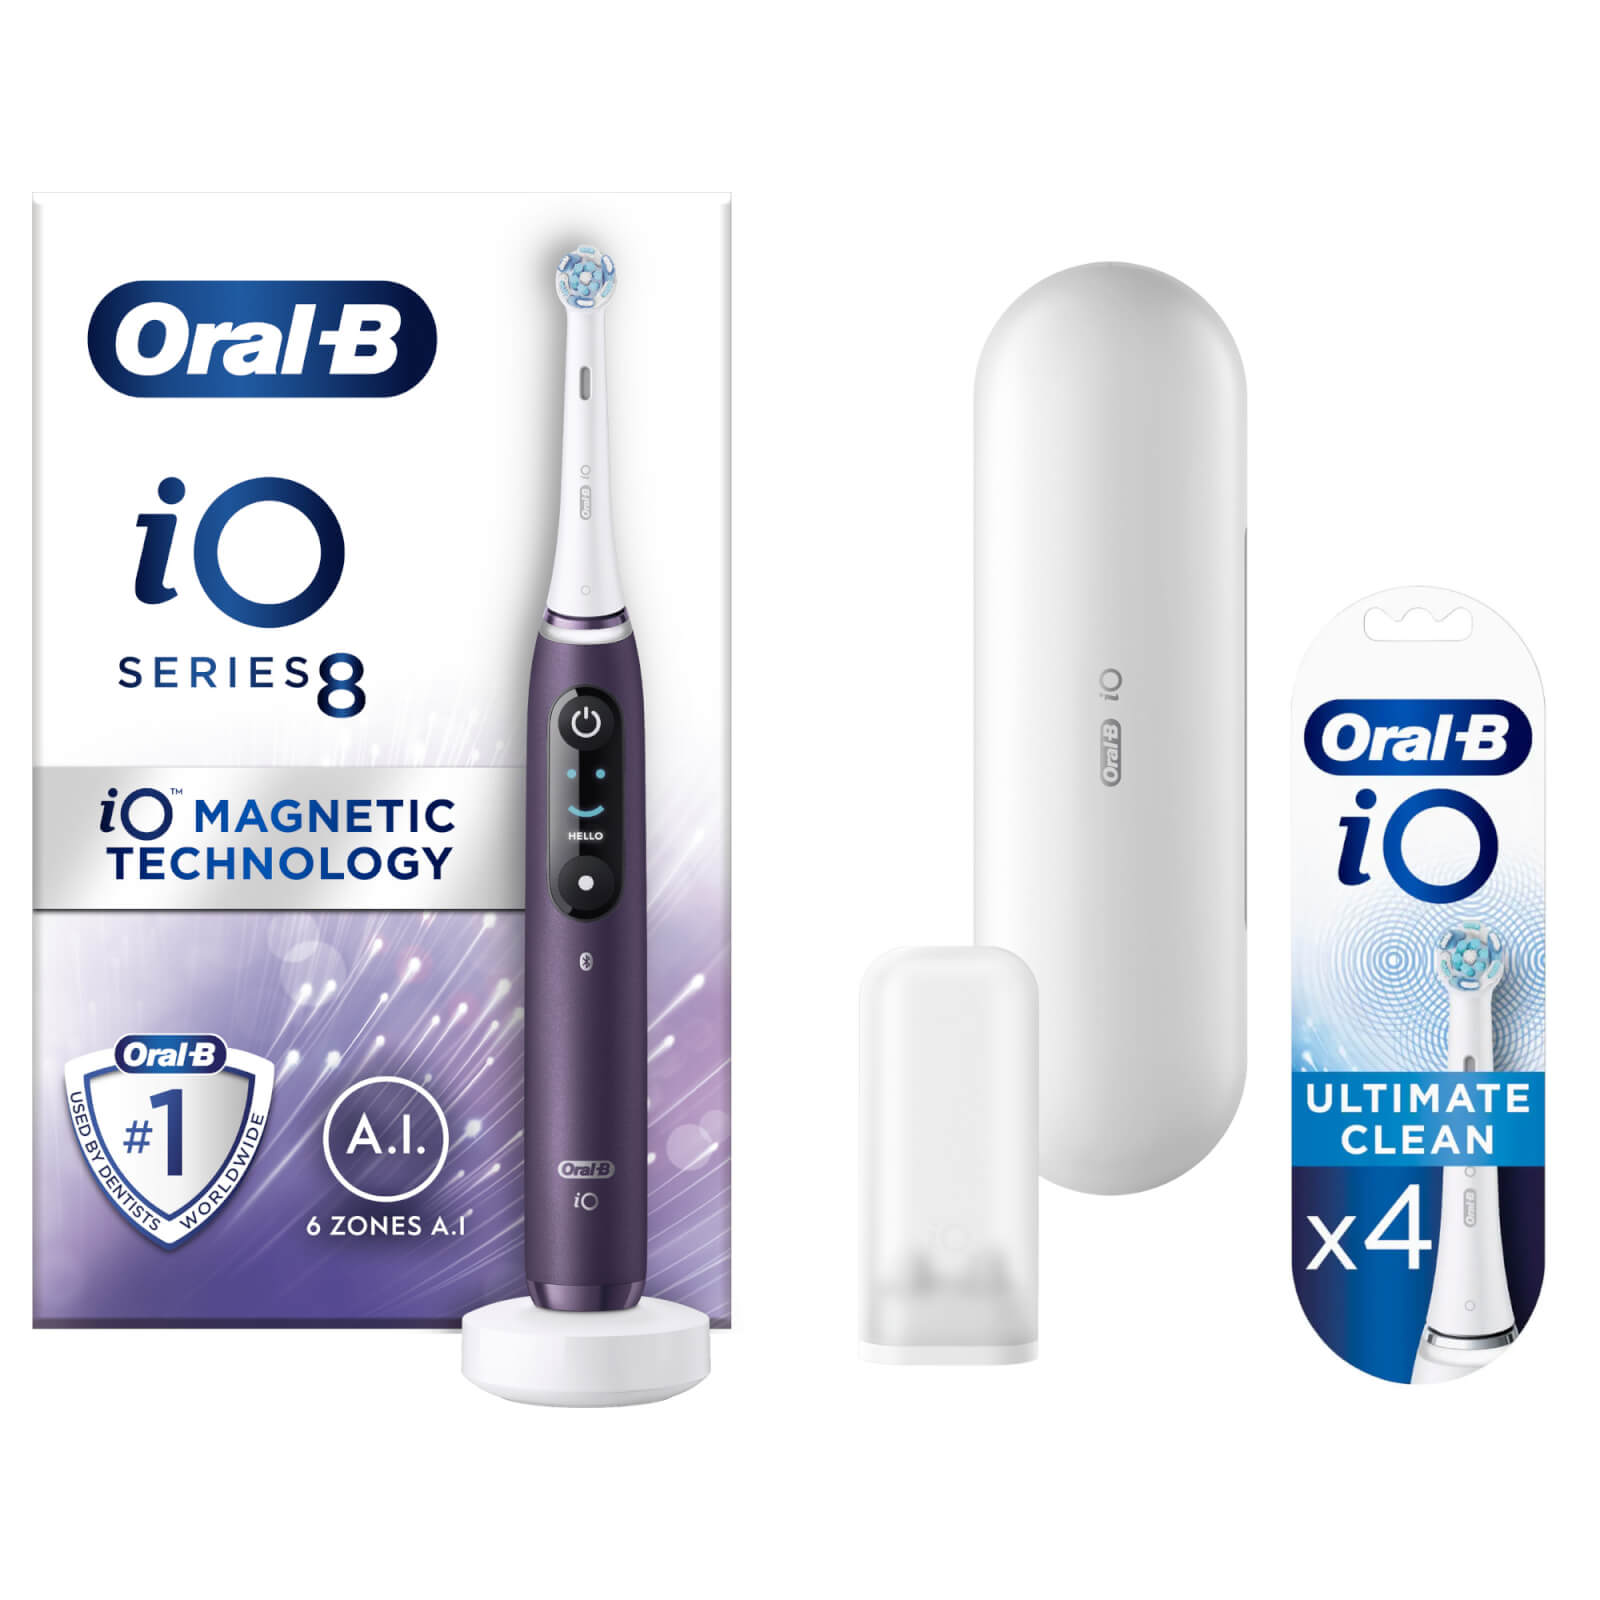 Oral B iO8 Violet Electric Toothbrush with Travel Case - Toothbrush + 4 Refills